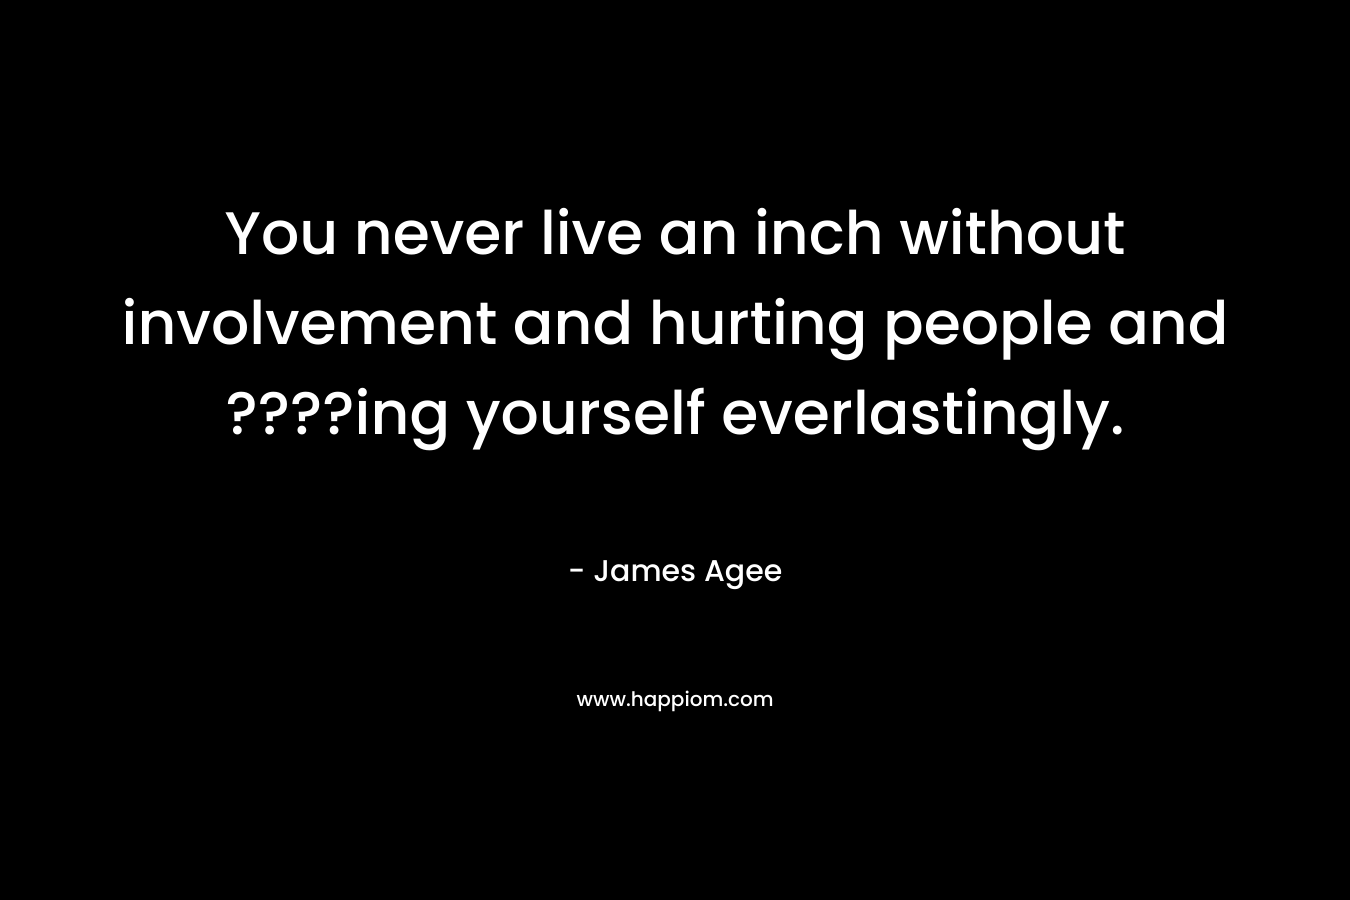 You never live an inch without involvement and hurting people and ????ing yourself everlastingly.